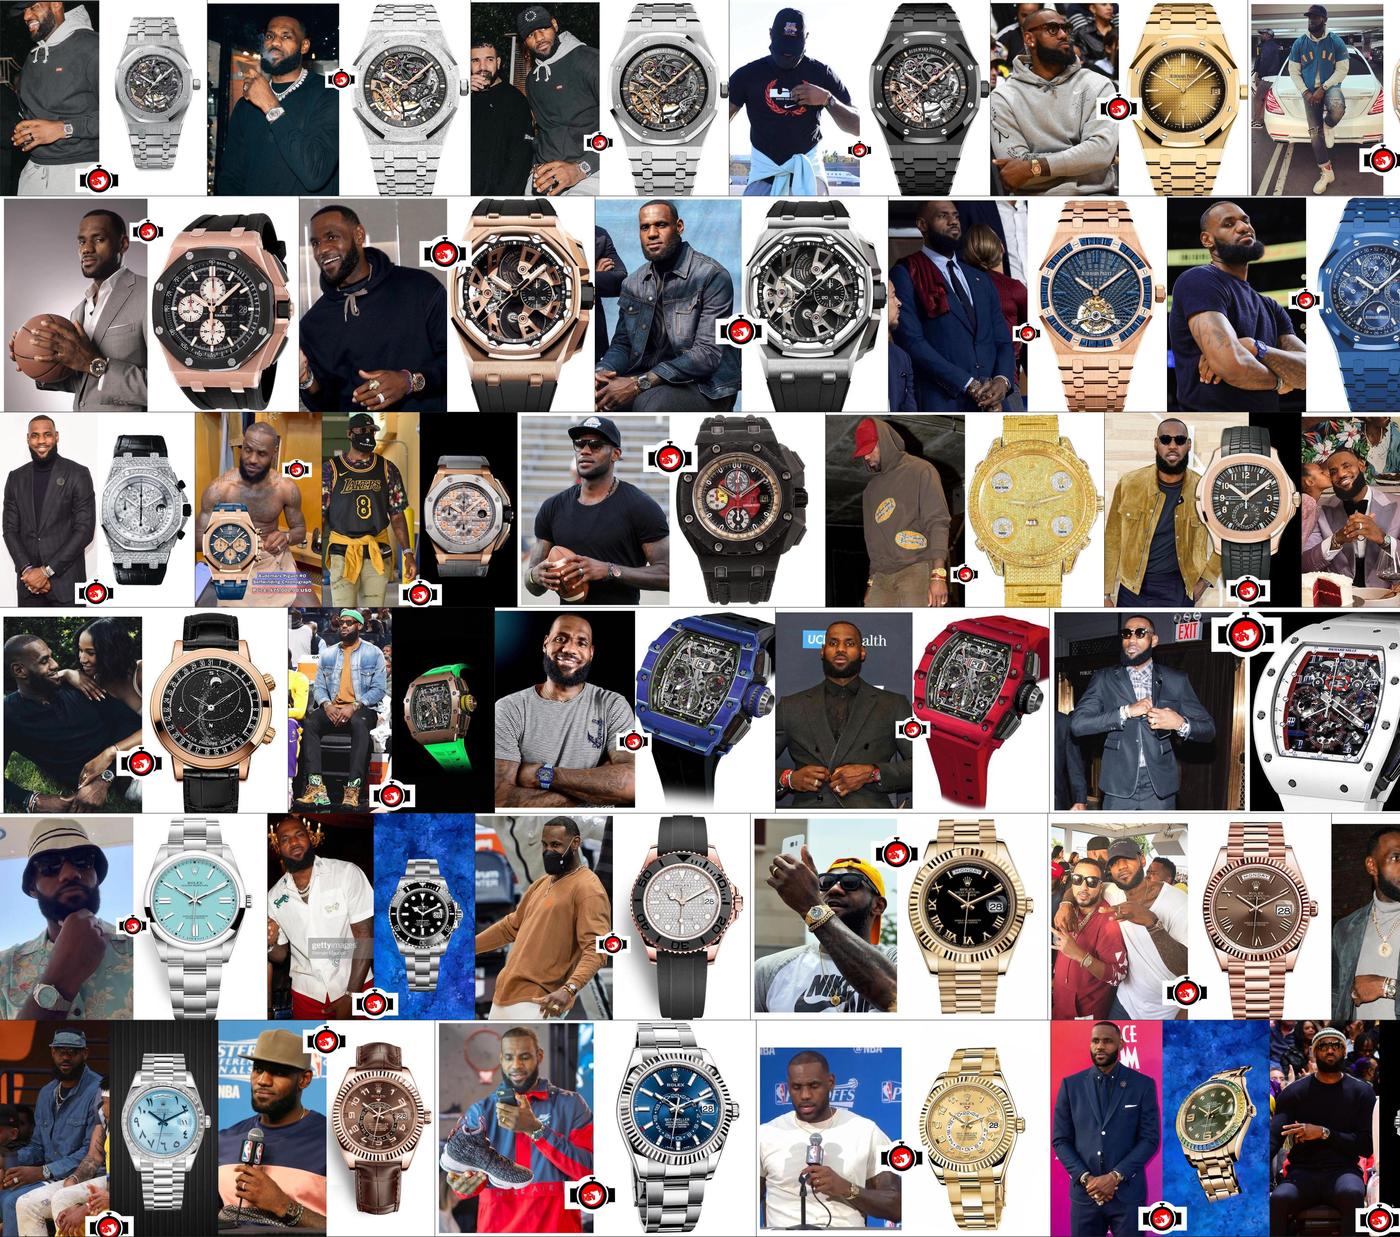 A Closer Look at LeBron James's Impressive Watch Collection